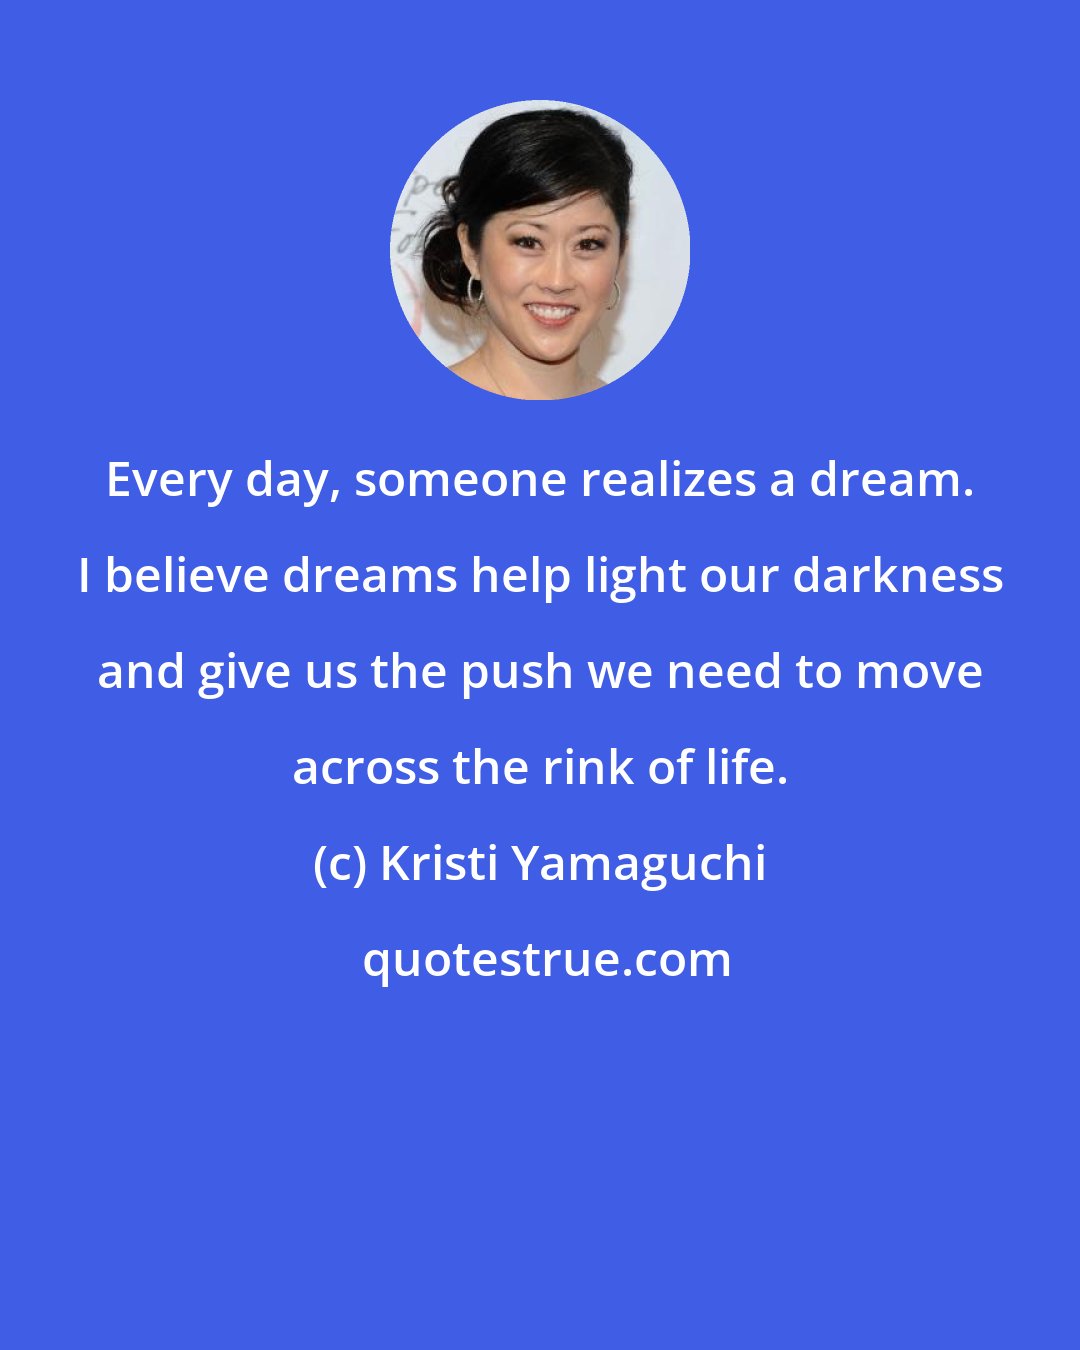 Kristi Yamaguchi: Every day, someone realizes a dream. I believe dreams help light our darkness and give us the push we need to move across the rink of life.